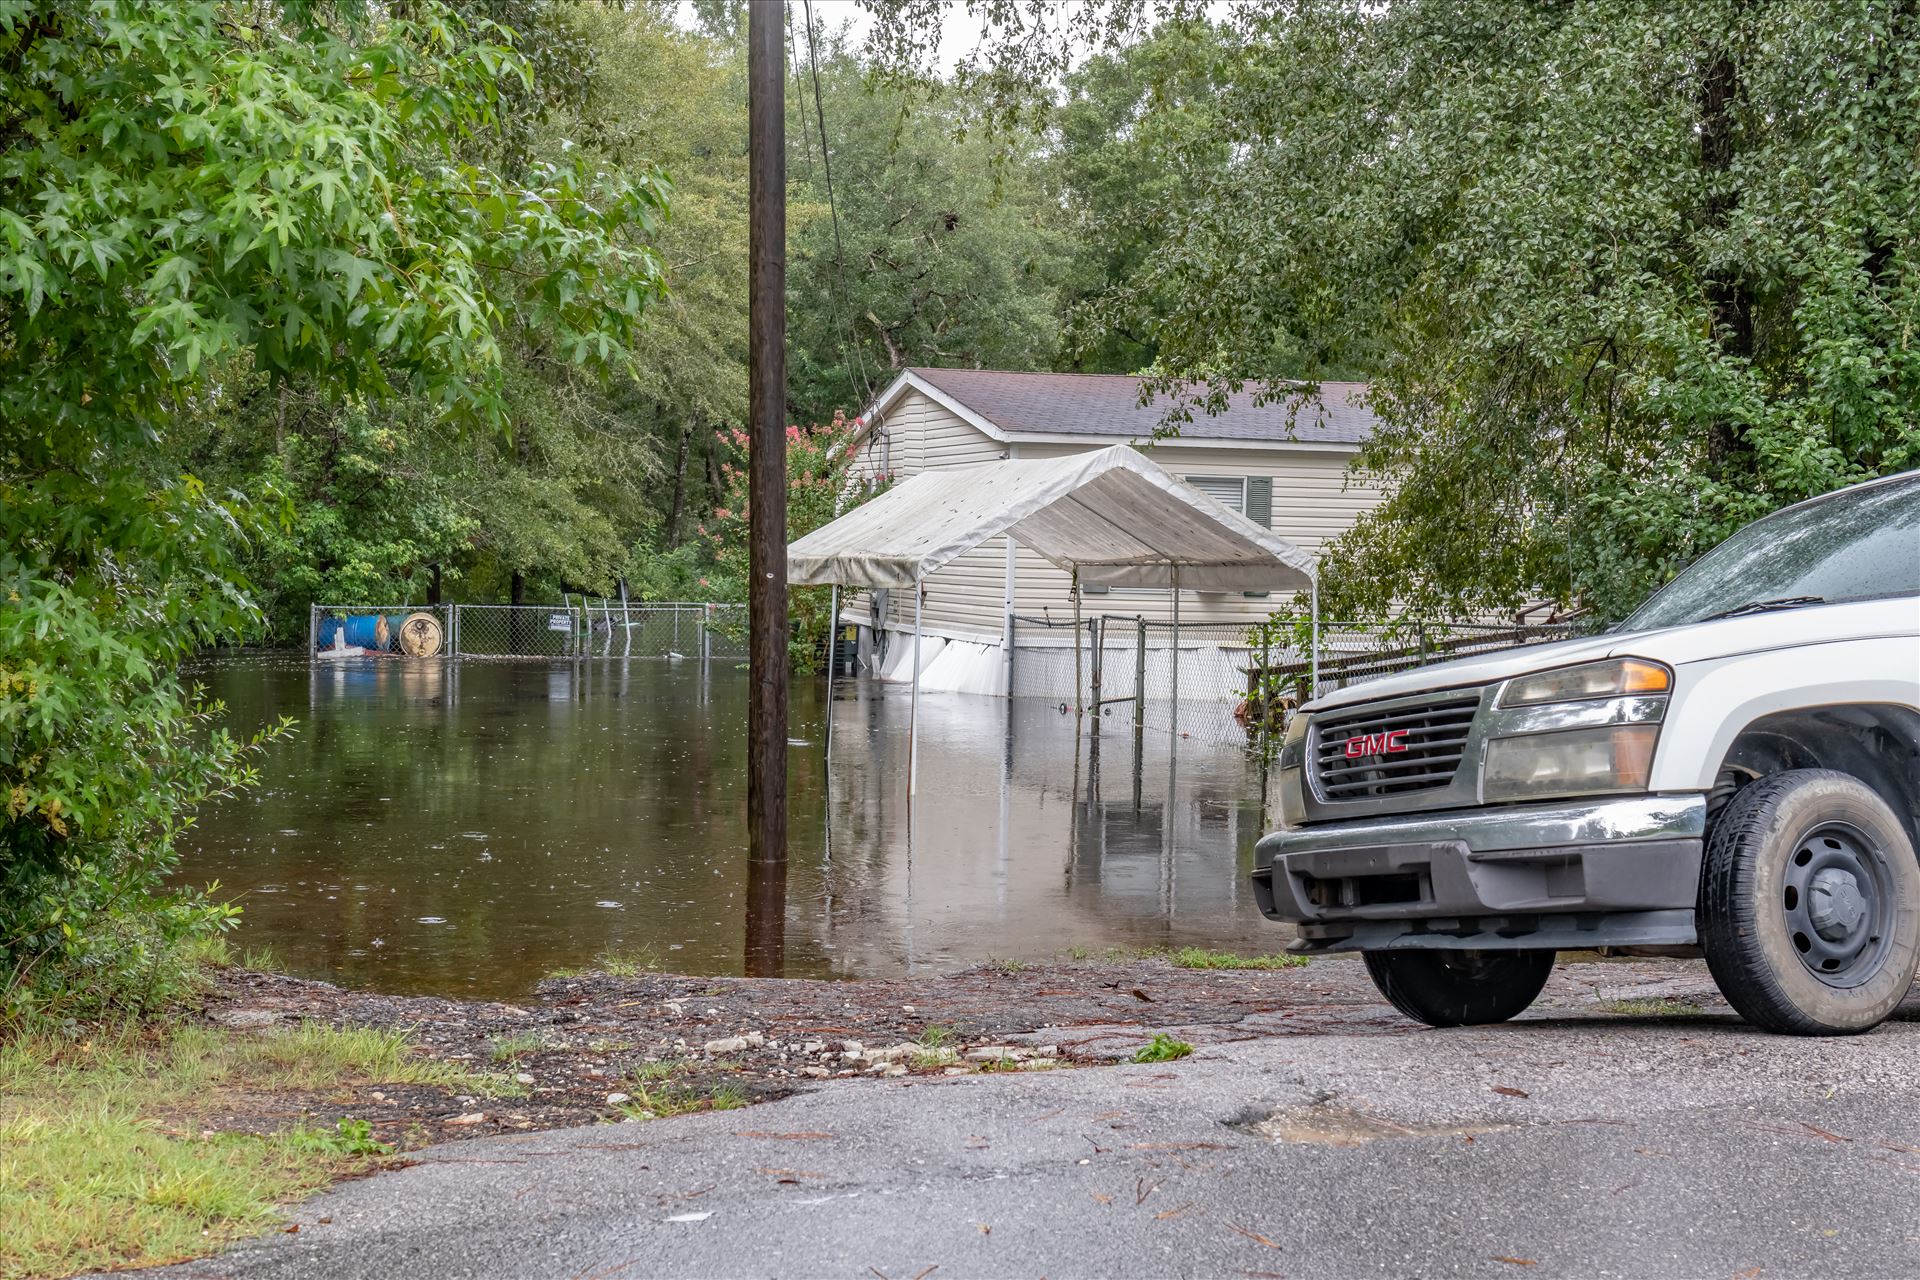 bear creek out of bank 6 August 02, 2018.jpg August 02, 2018 heavy rains flooded many parts of Bay County, Florida. This photo is in the Bear Creek area. by Terry Kelly Photography